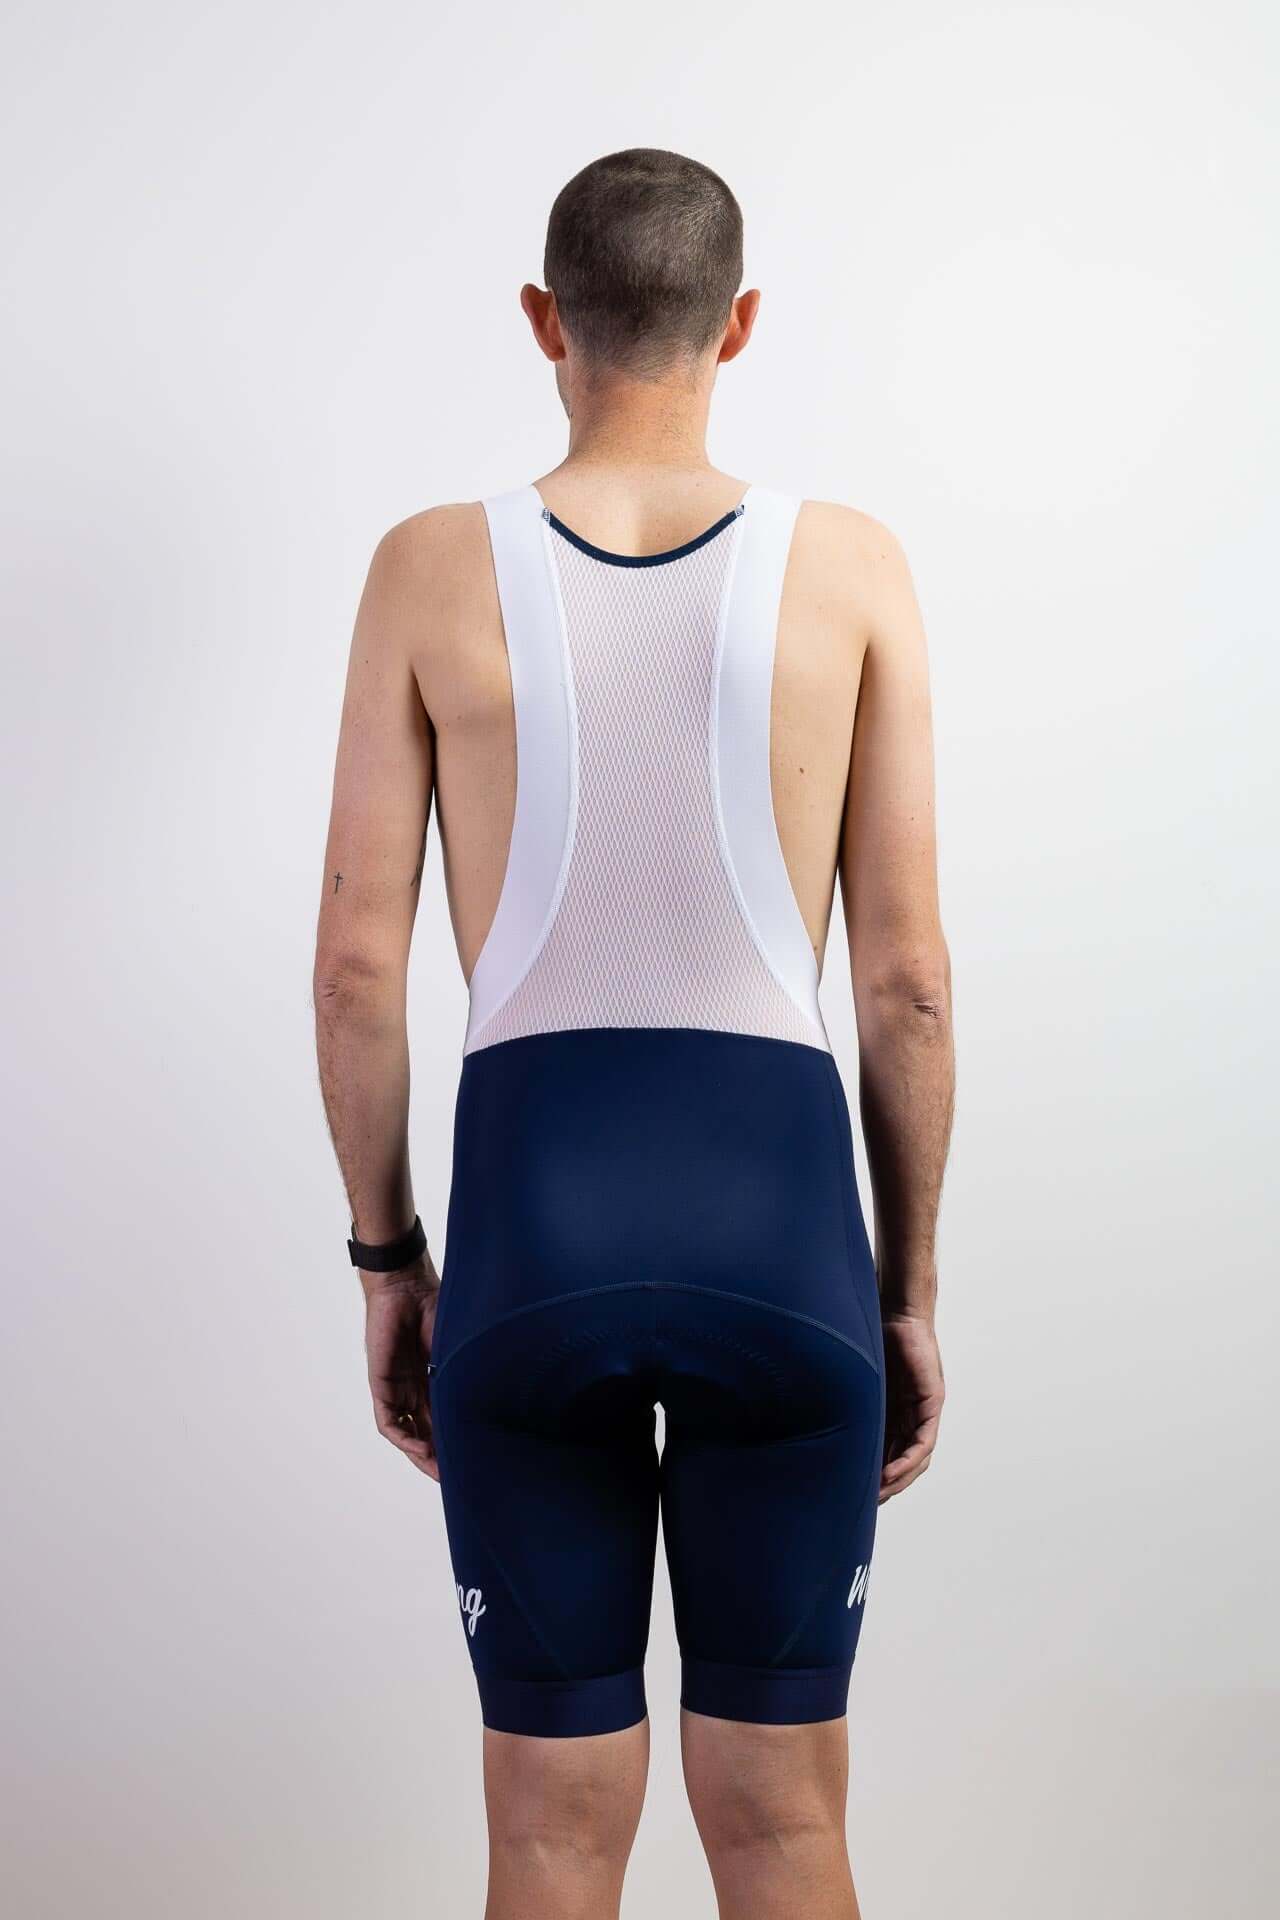 Willing Coffee Men's Cycling Bib Shorts in Dark Navy - Experience the ultimate ride with high-performance fabric. Style and comfort for your cycling adventures! 